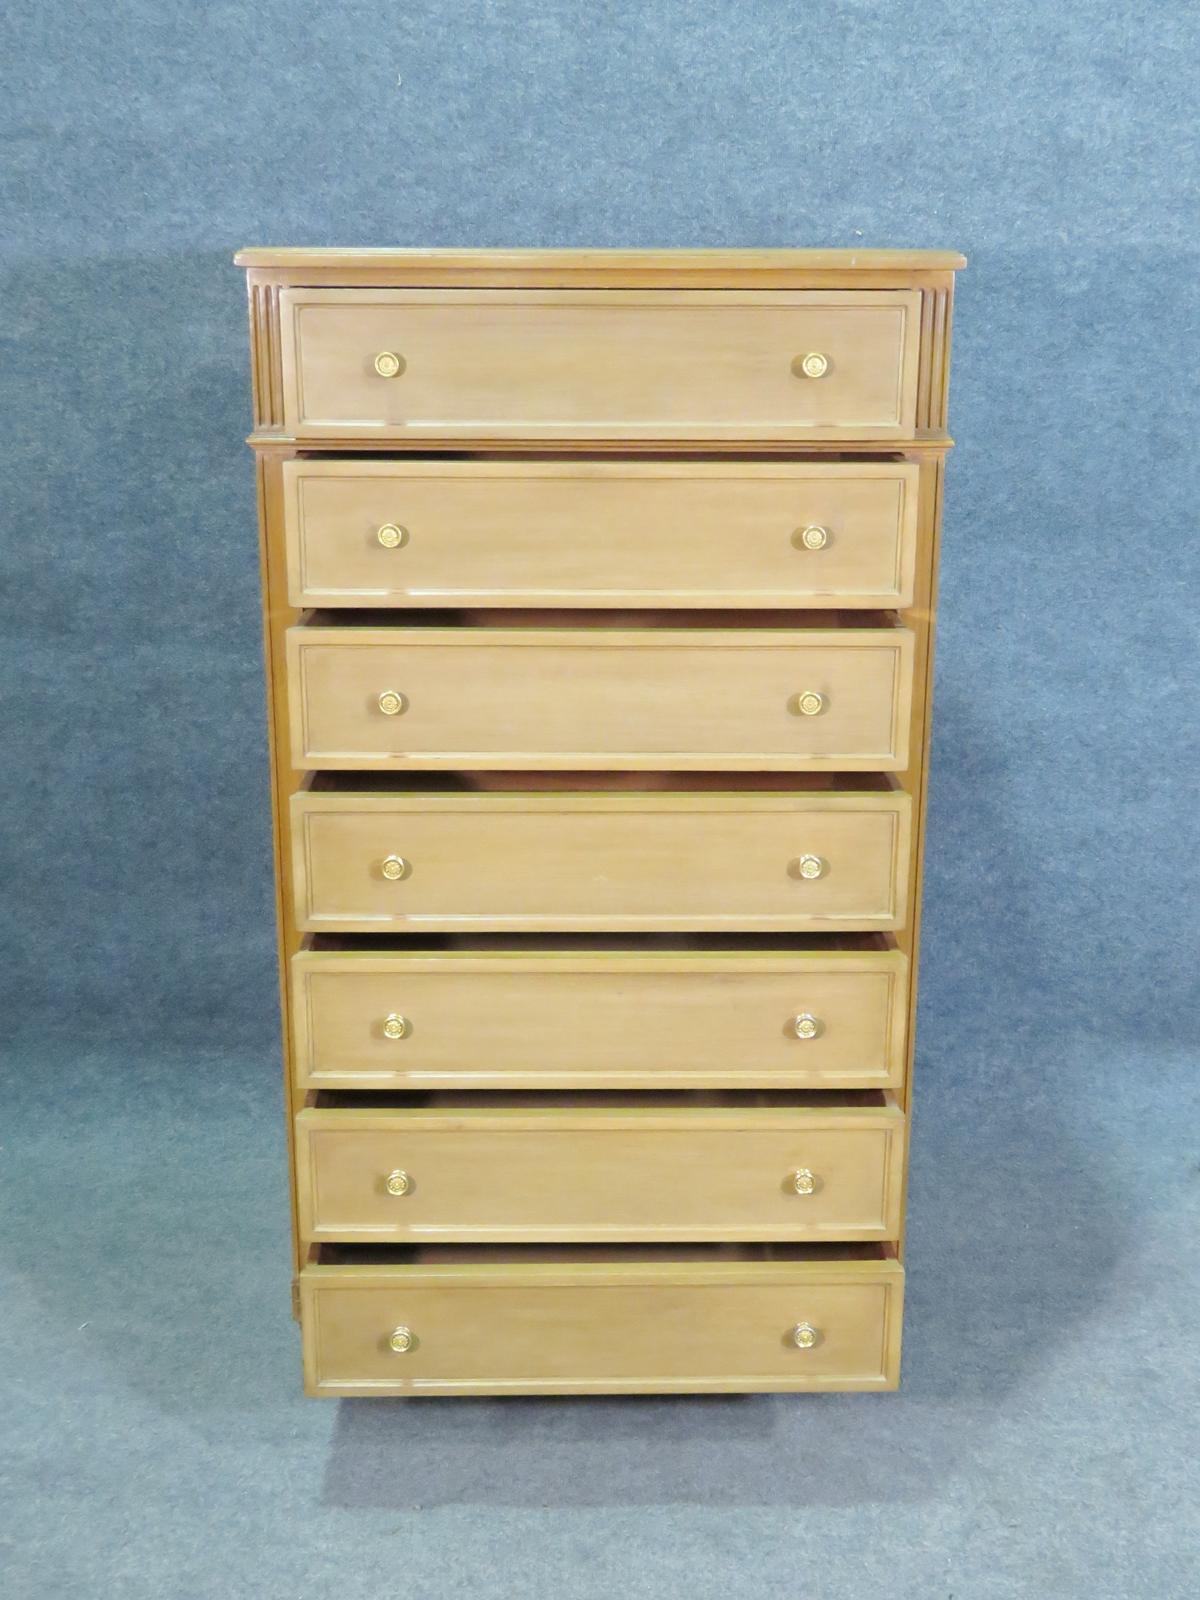 European Maison Jansen Style Tall Chest of Drawers 1 of 2 Similar Chests